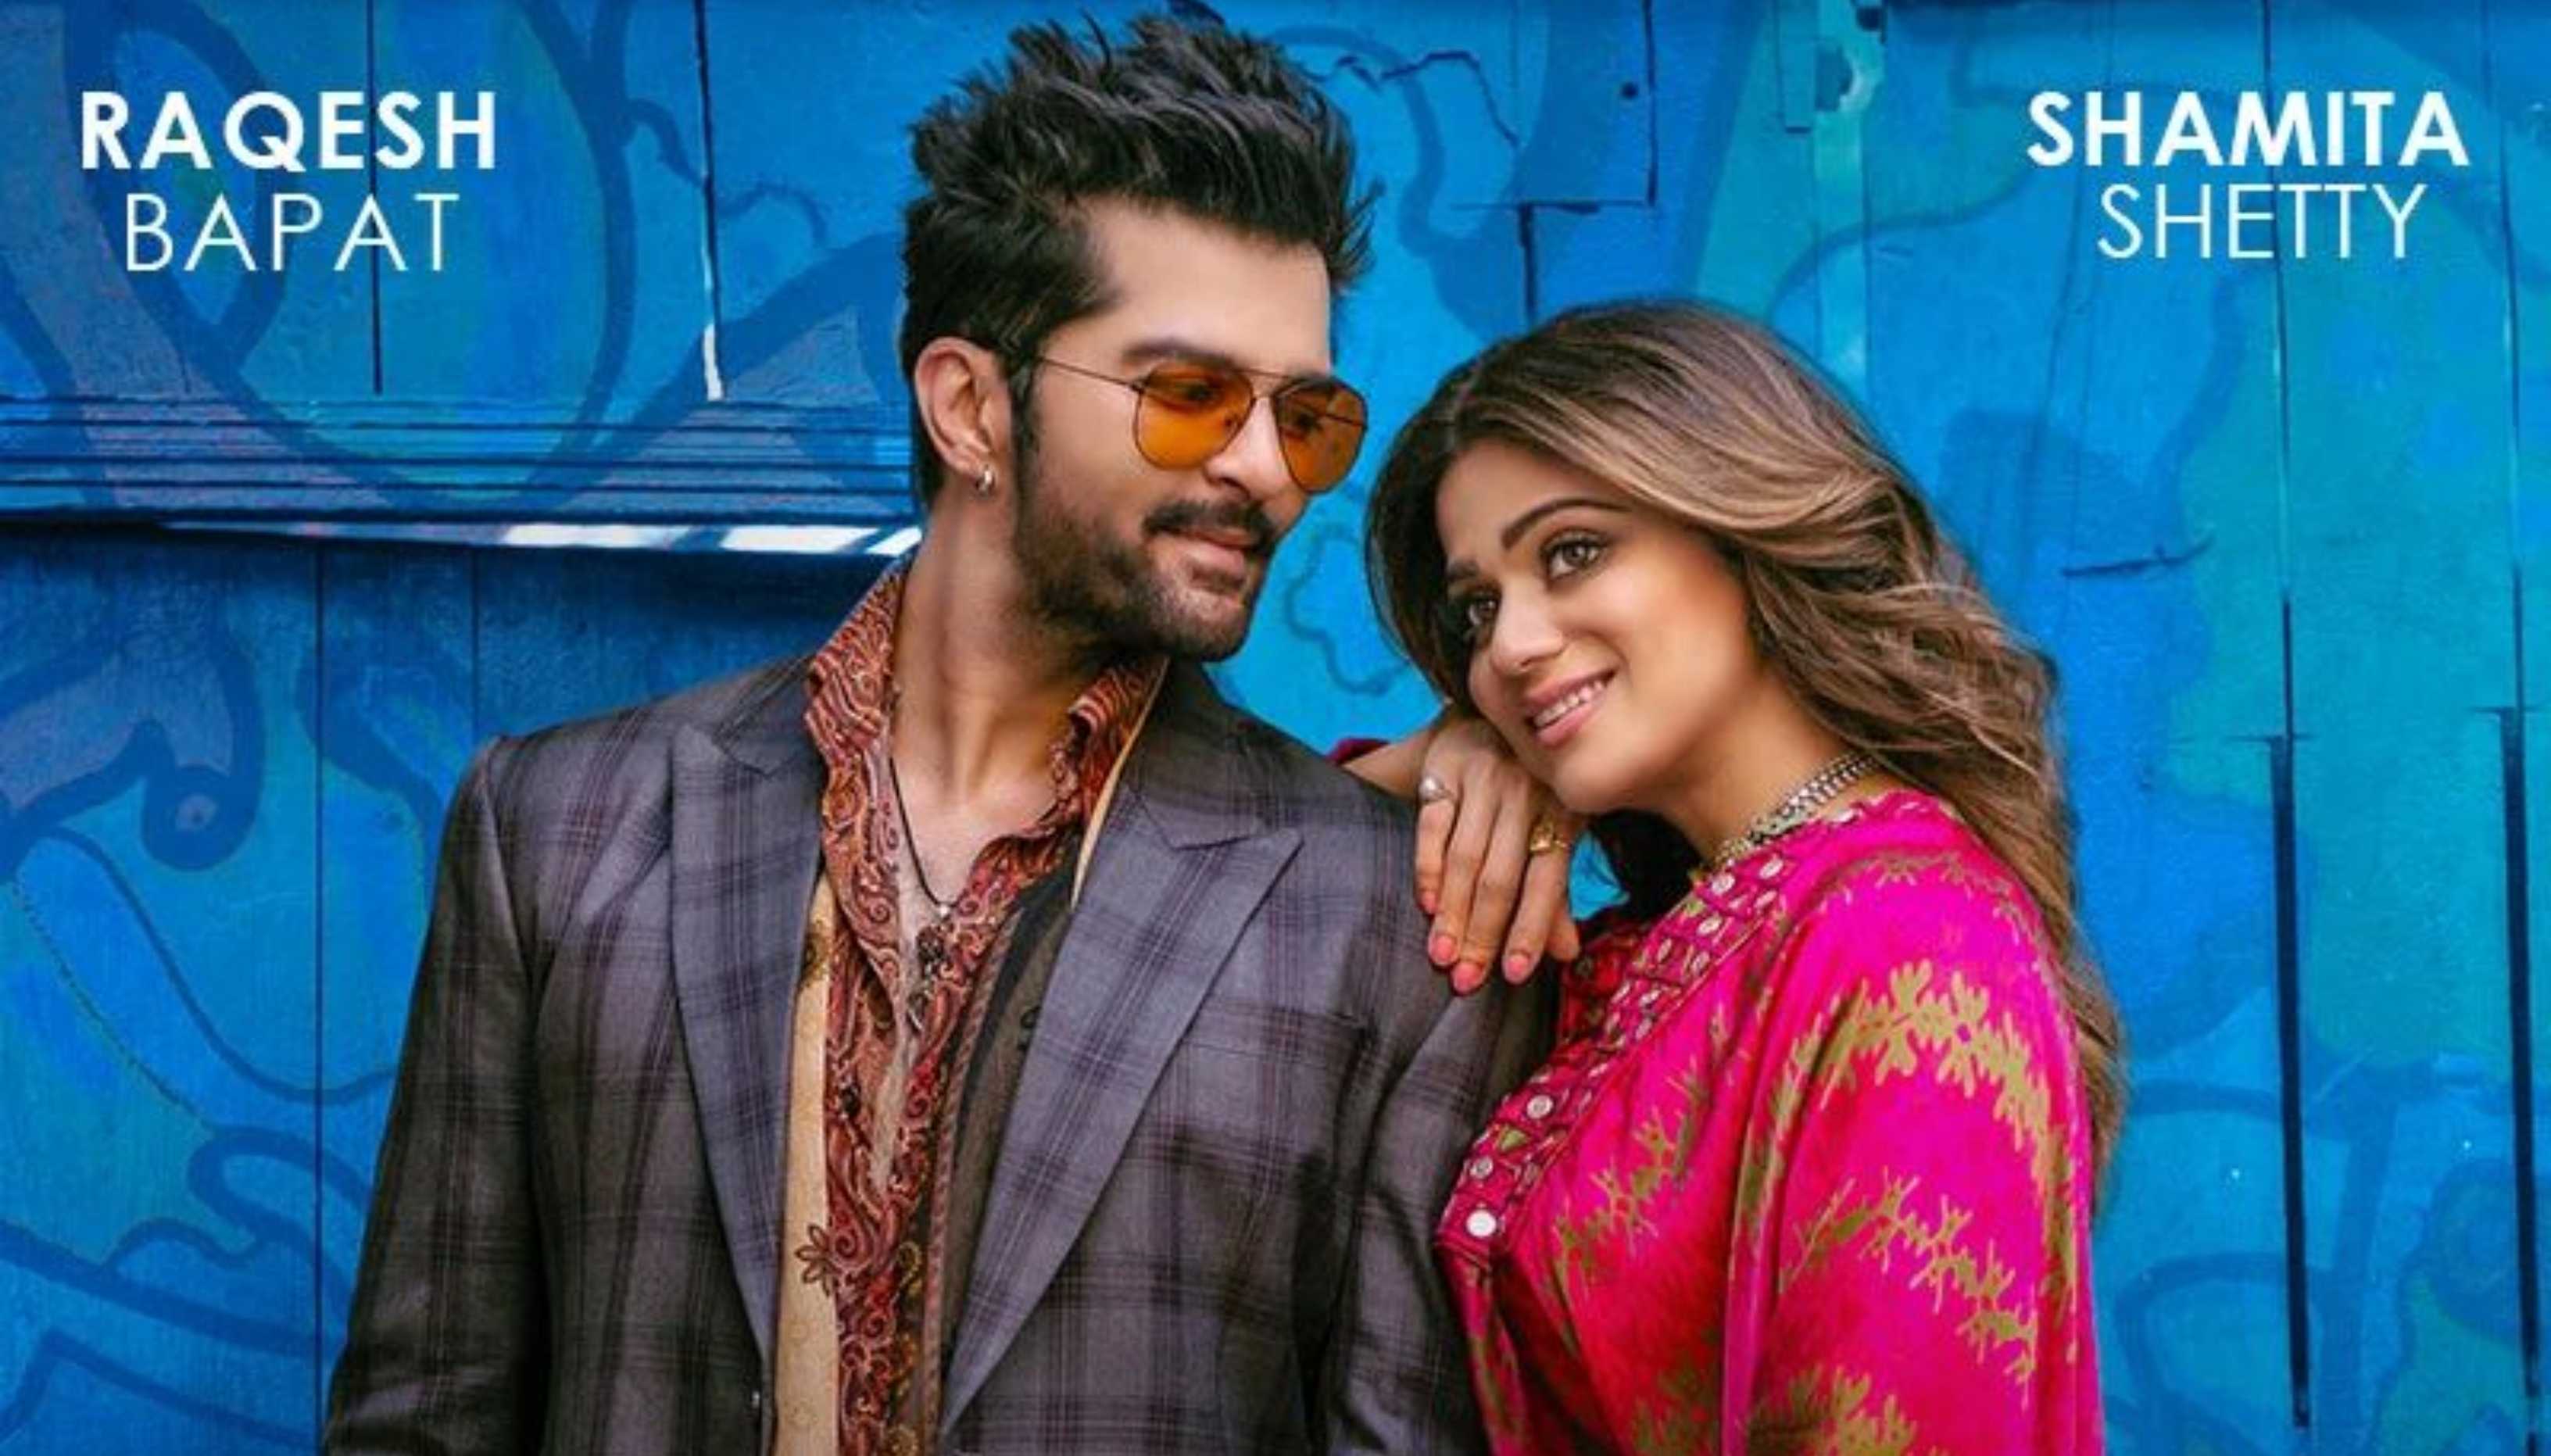 Raqesh Bapat is smitten by ex GF Shamita Shetty in the poster of Tere Vich Rab Disda; fans hope they patch up